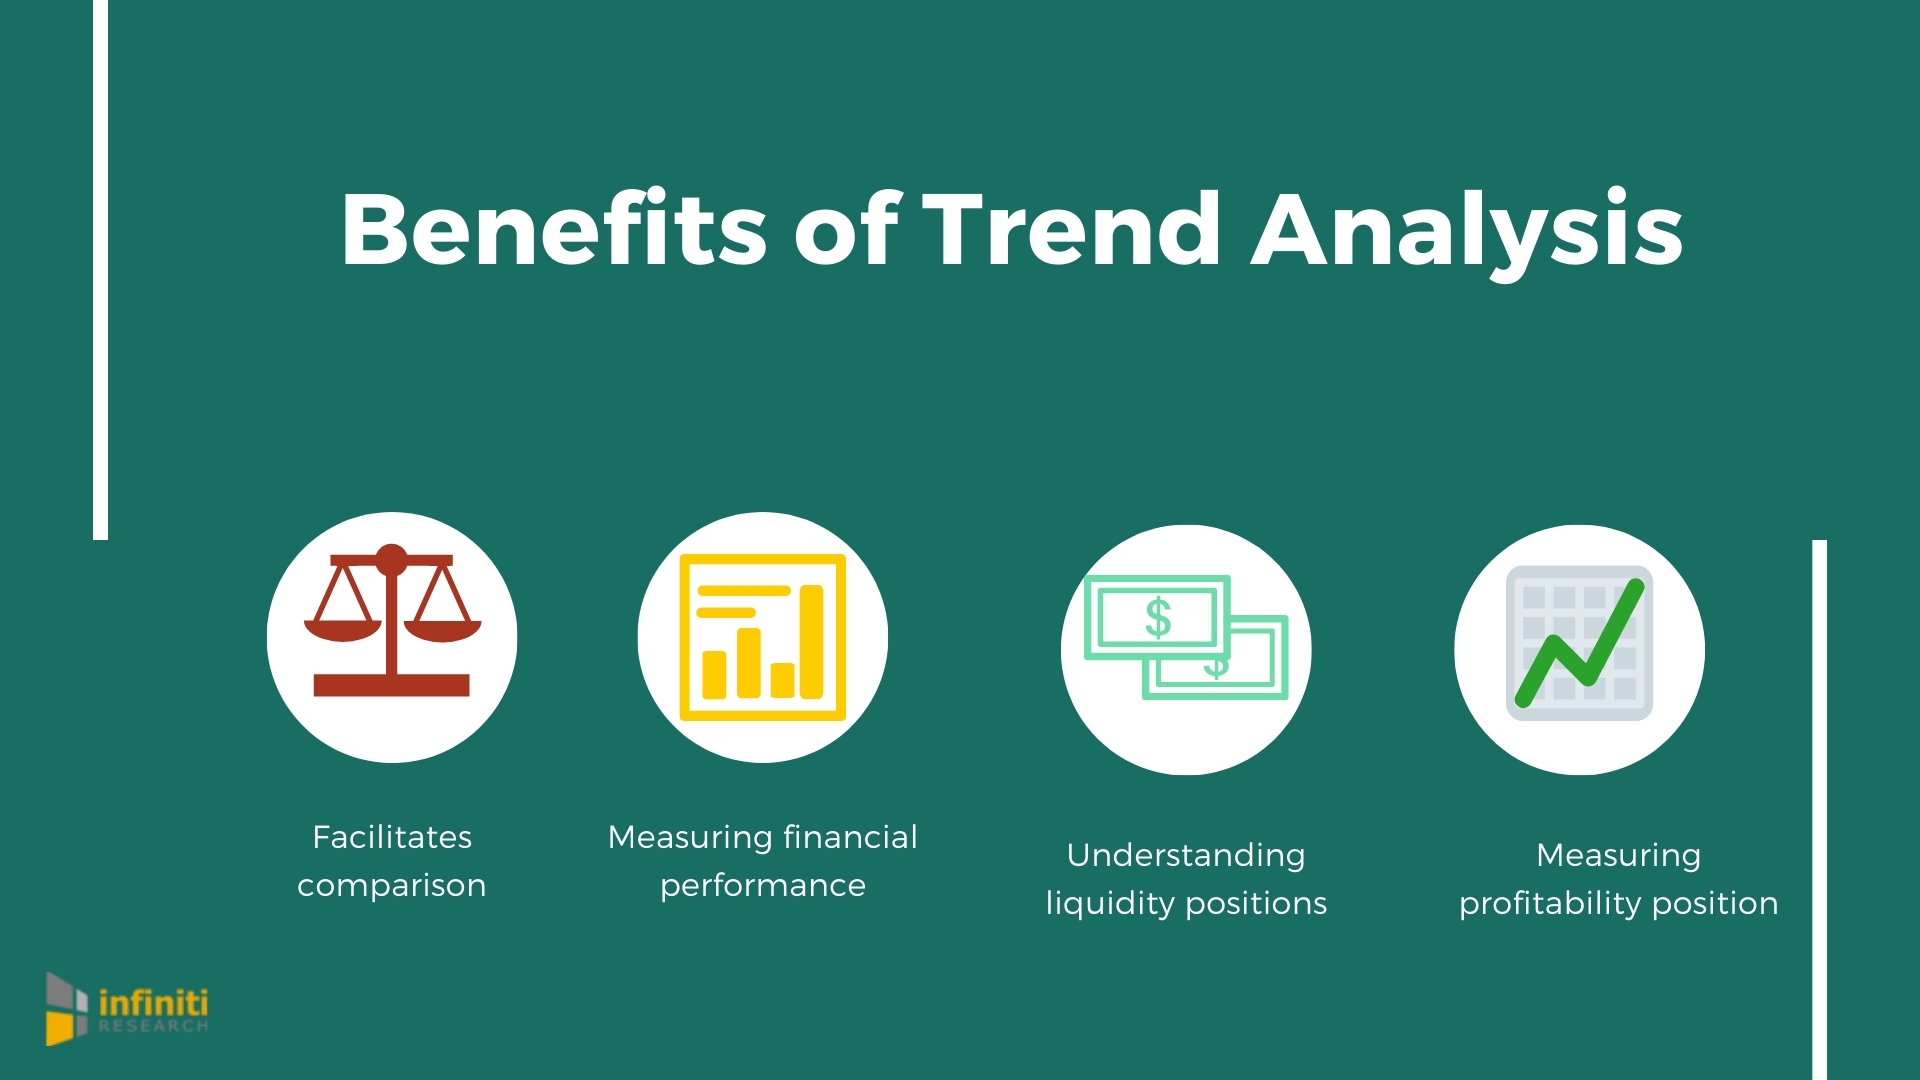 How Trend Analysis Can Help Your Business Better Analyze the